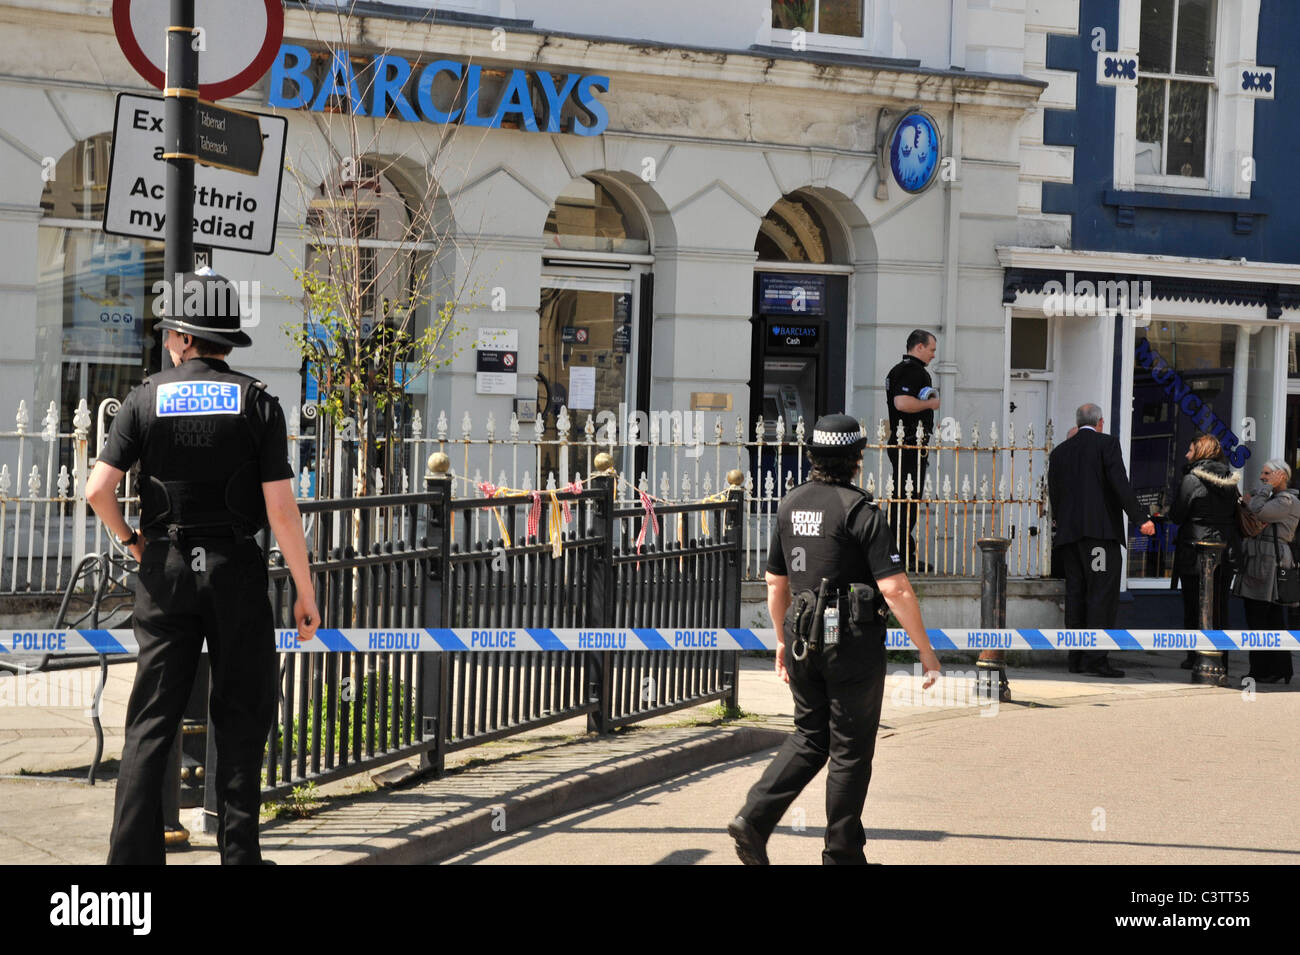 Police in attendance after a Bank robbery at a branch of Barclays bank, Machynlleth Powys Wales UK - May 19 2011 Stock Photo